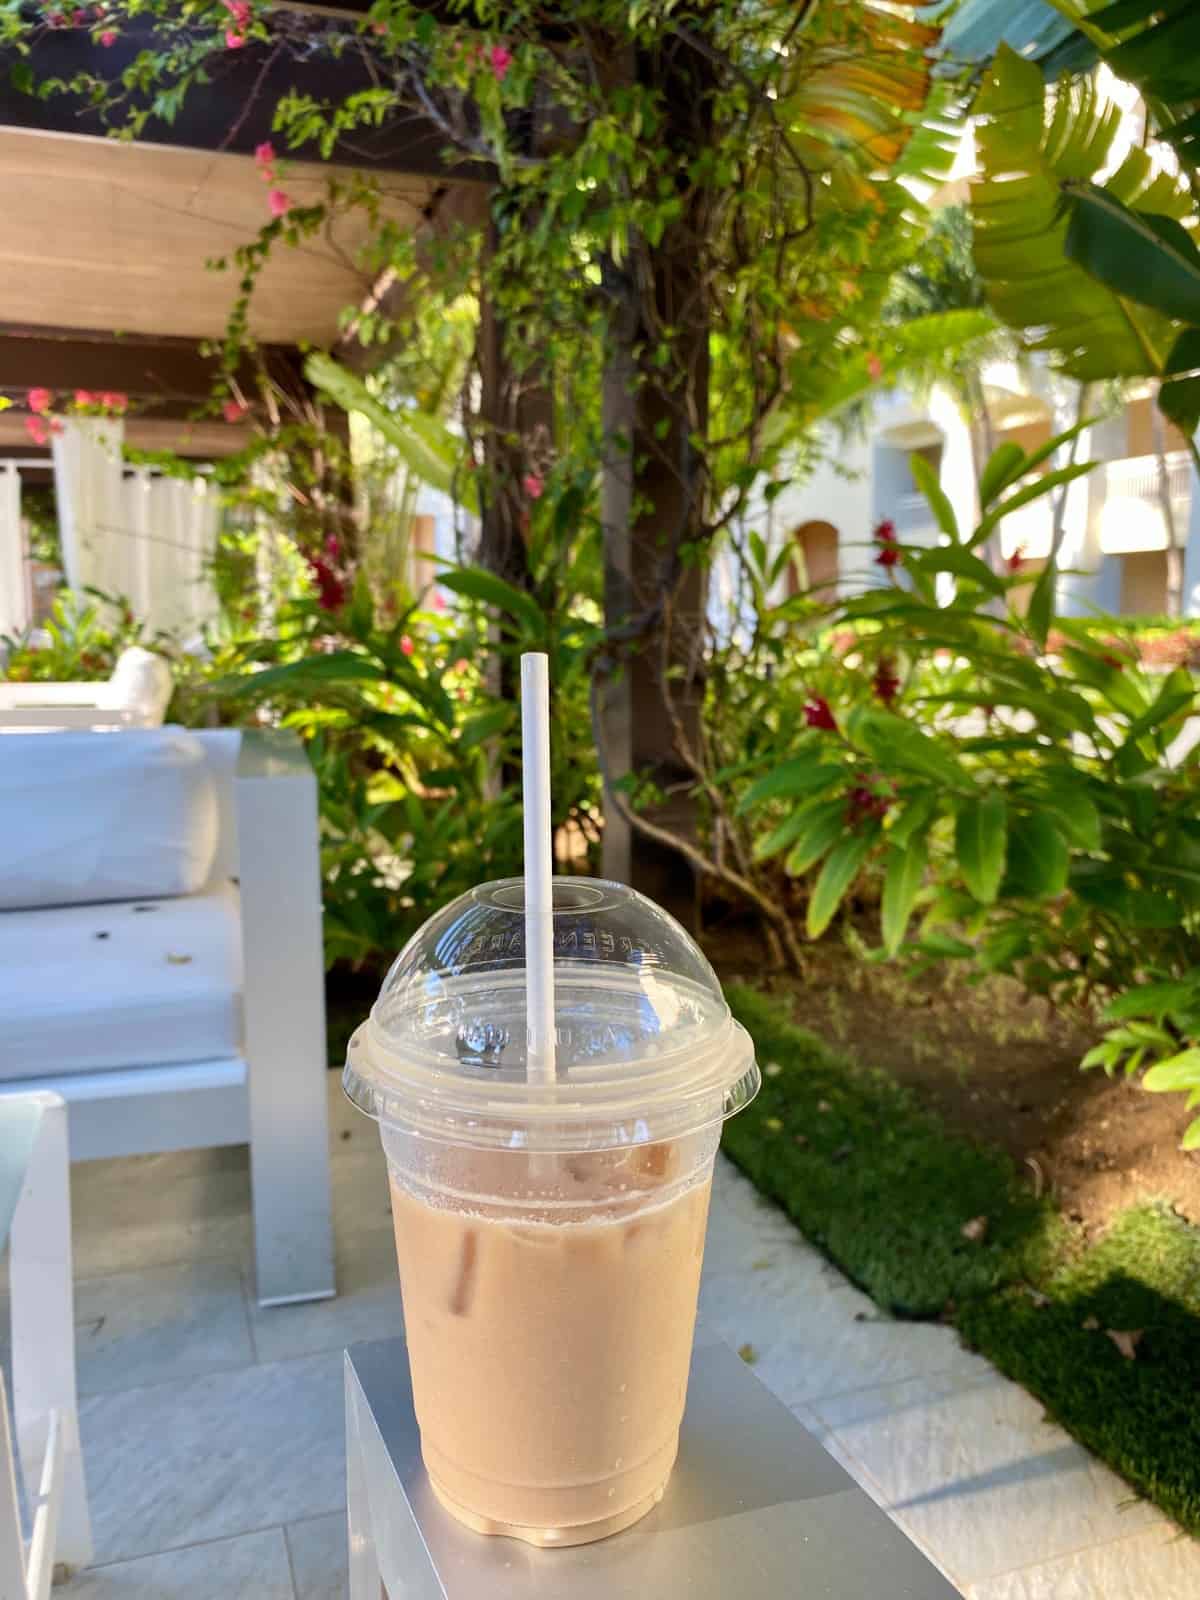 The iced coffee at Iberostar Suites